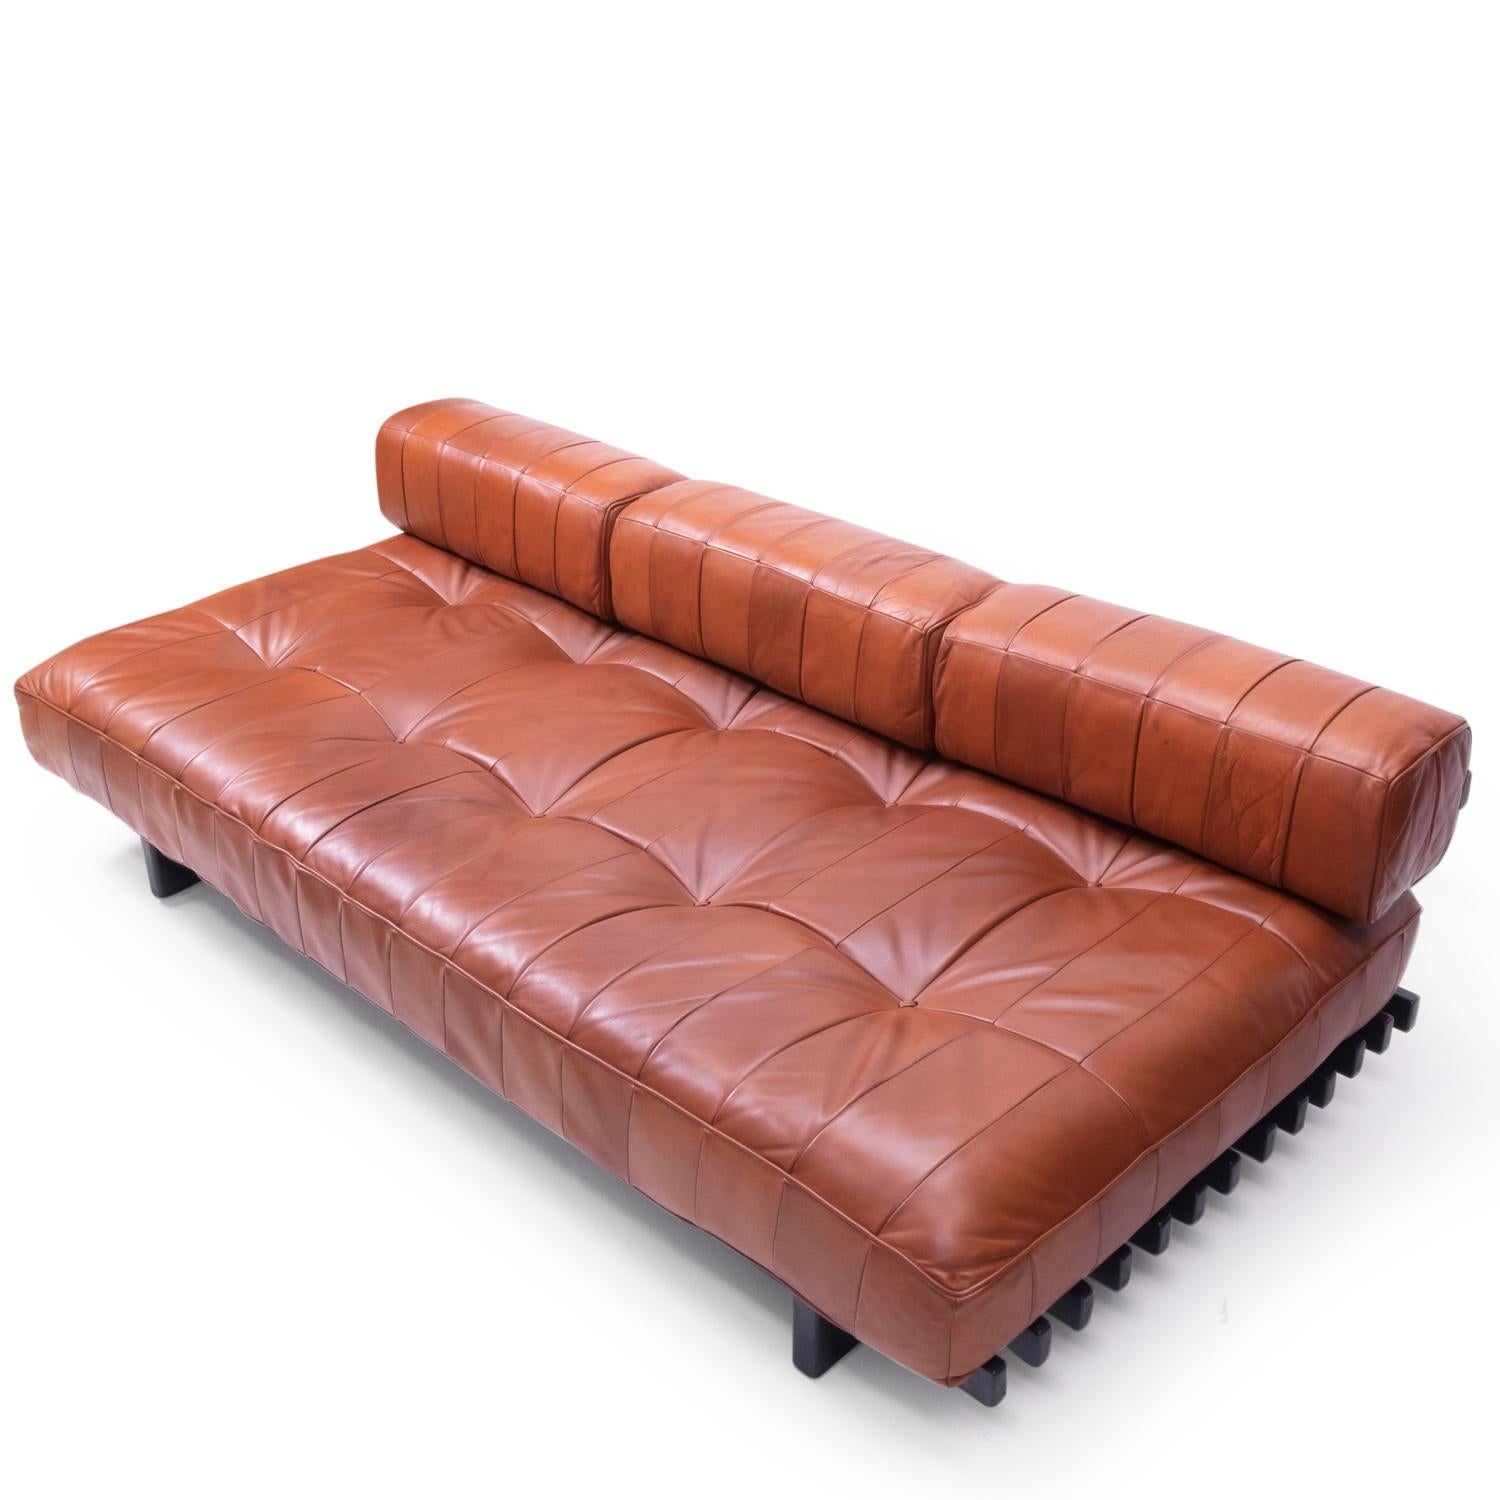 De Sede Daybed model DS 80 in a warm brown leather, featuring a wonderful patine and comes with 3 pillows.

The leather is a patchwork design made from pigmented aniline leather, which typically gives a very “lived” look due to the open nature of